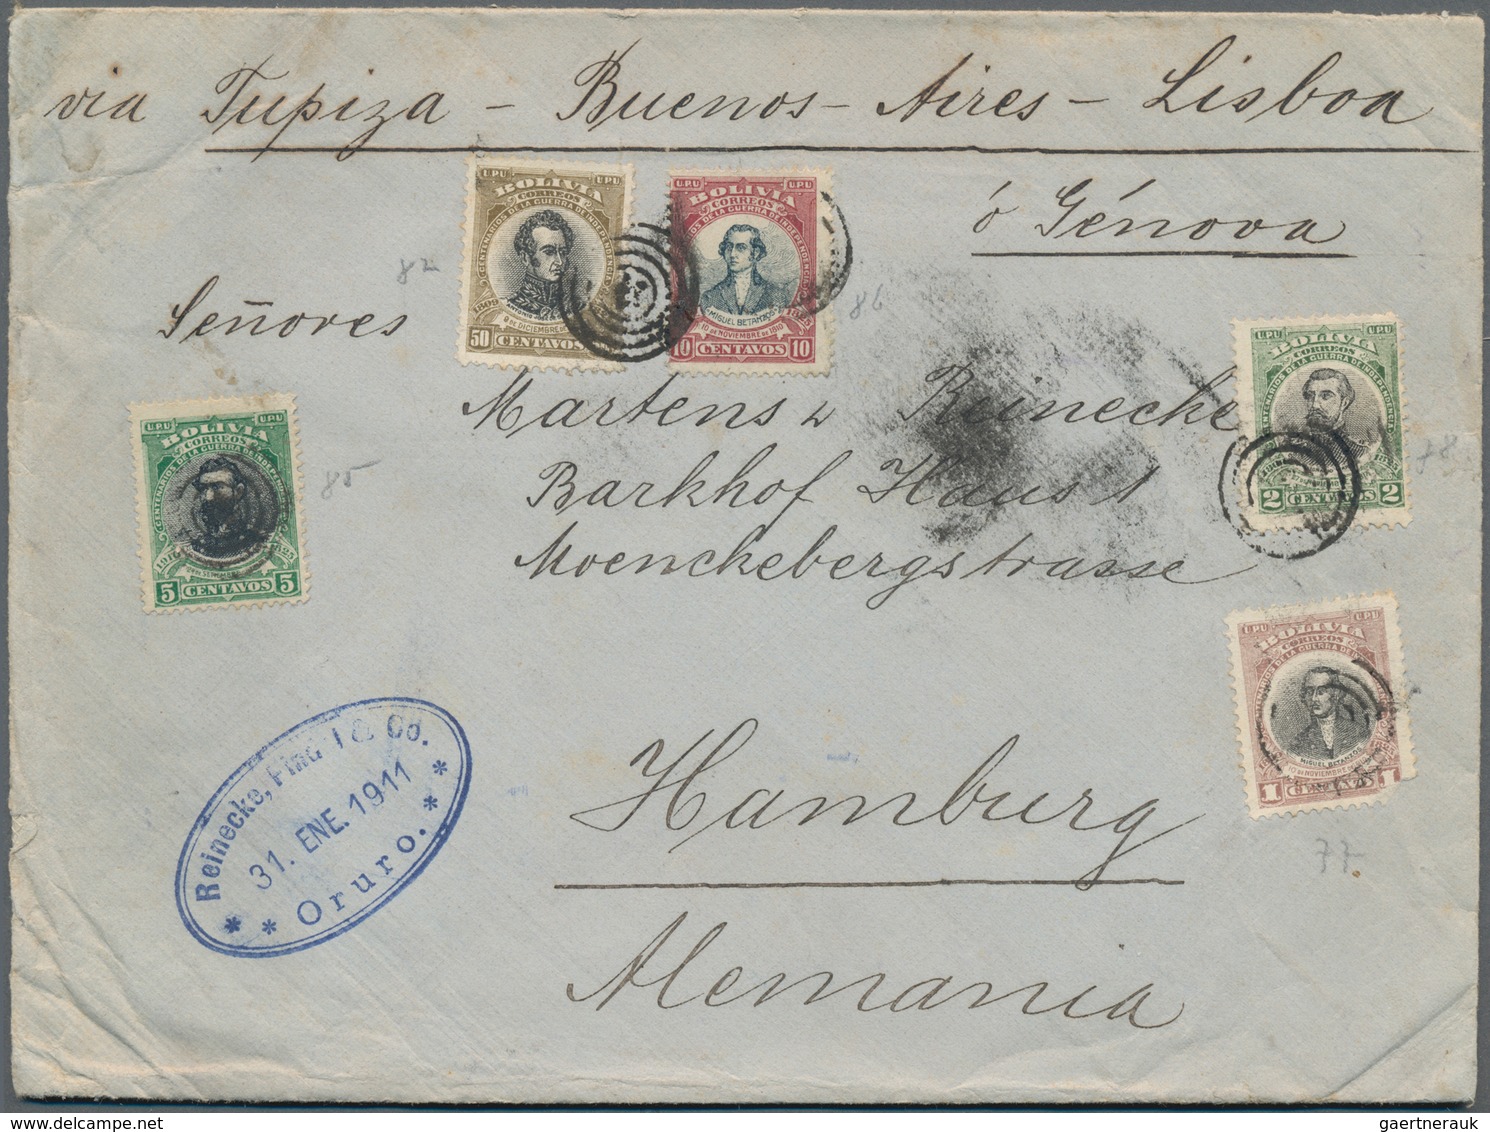 Bolivien: 1864/1939 (ca.), album with ca. 170 covers, postcards and mainly used postal stationeries,